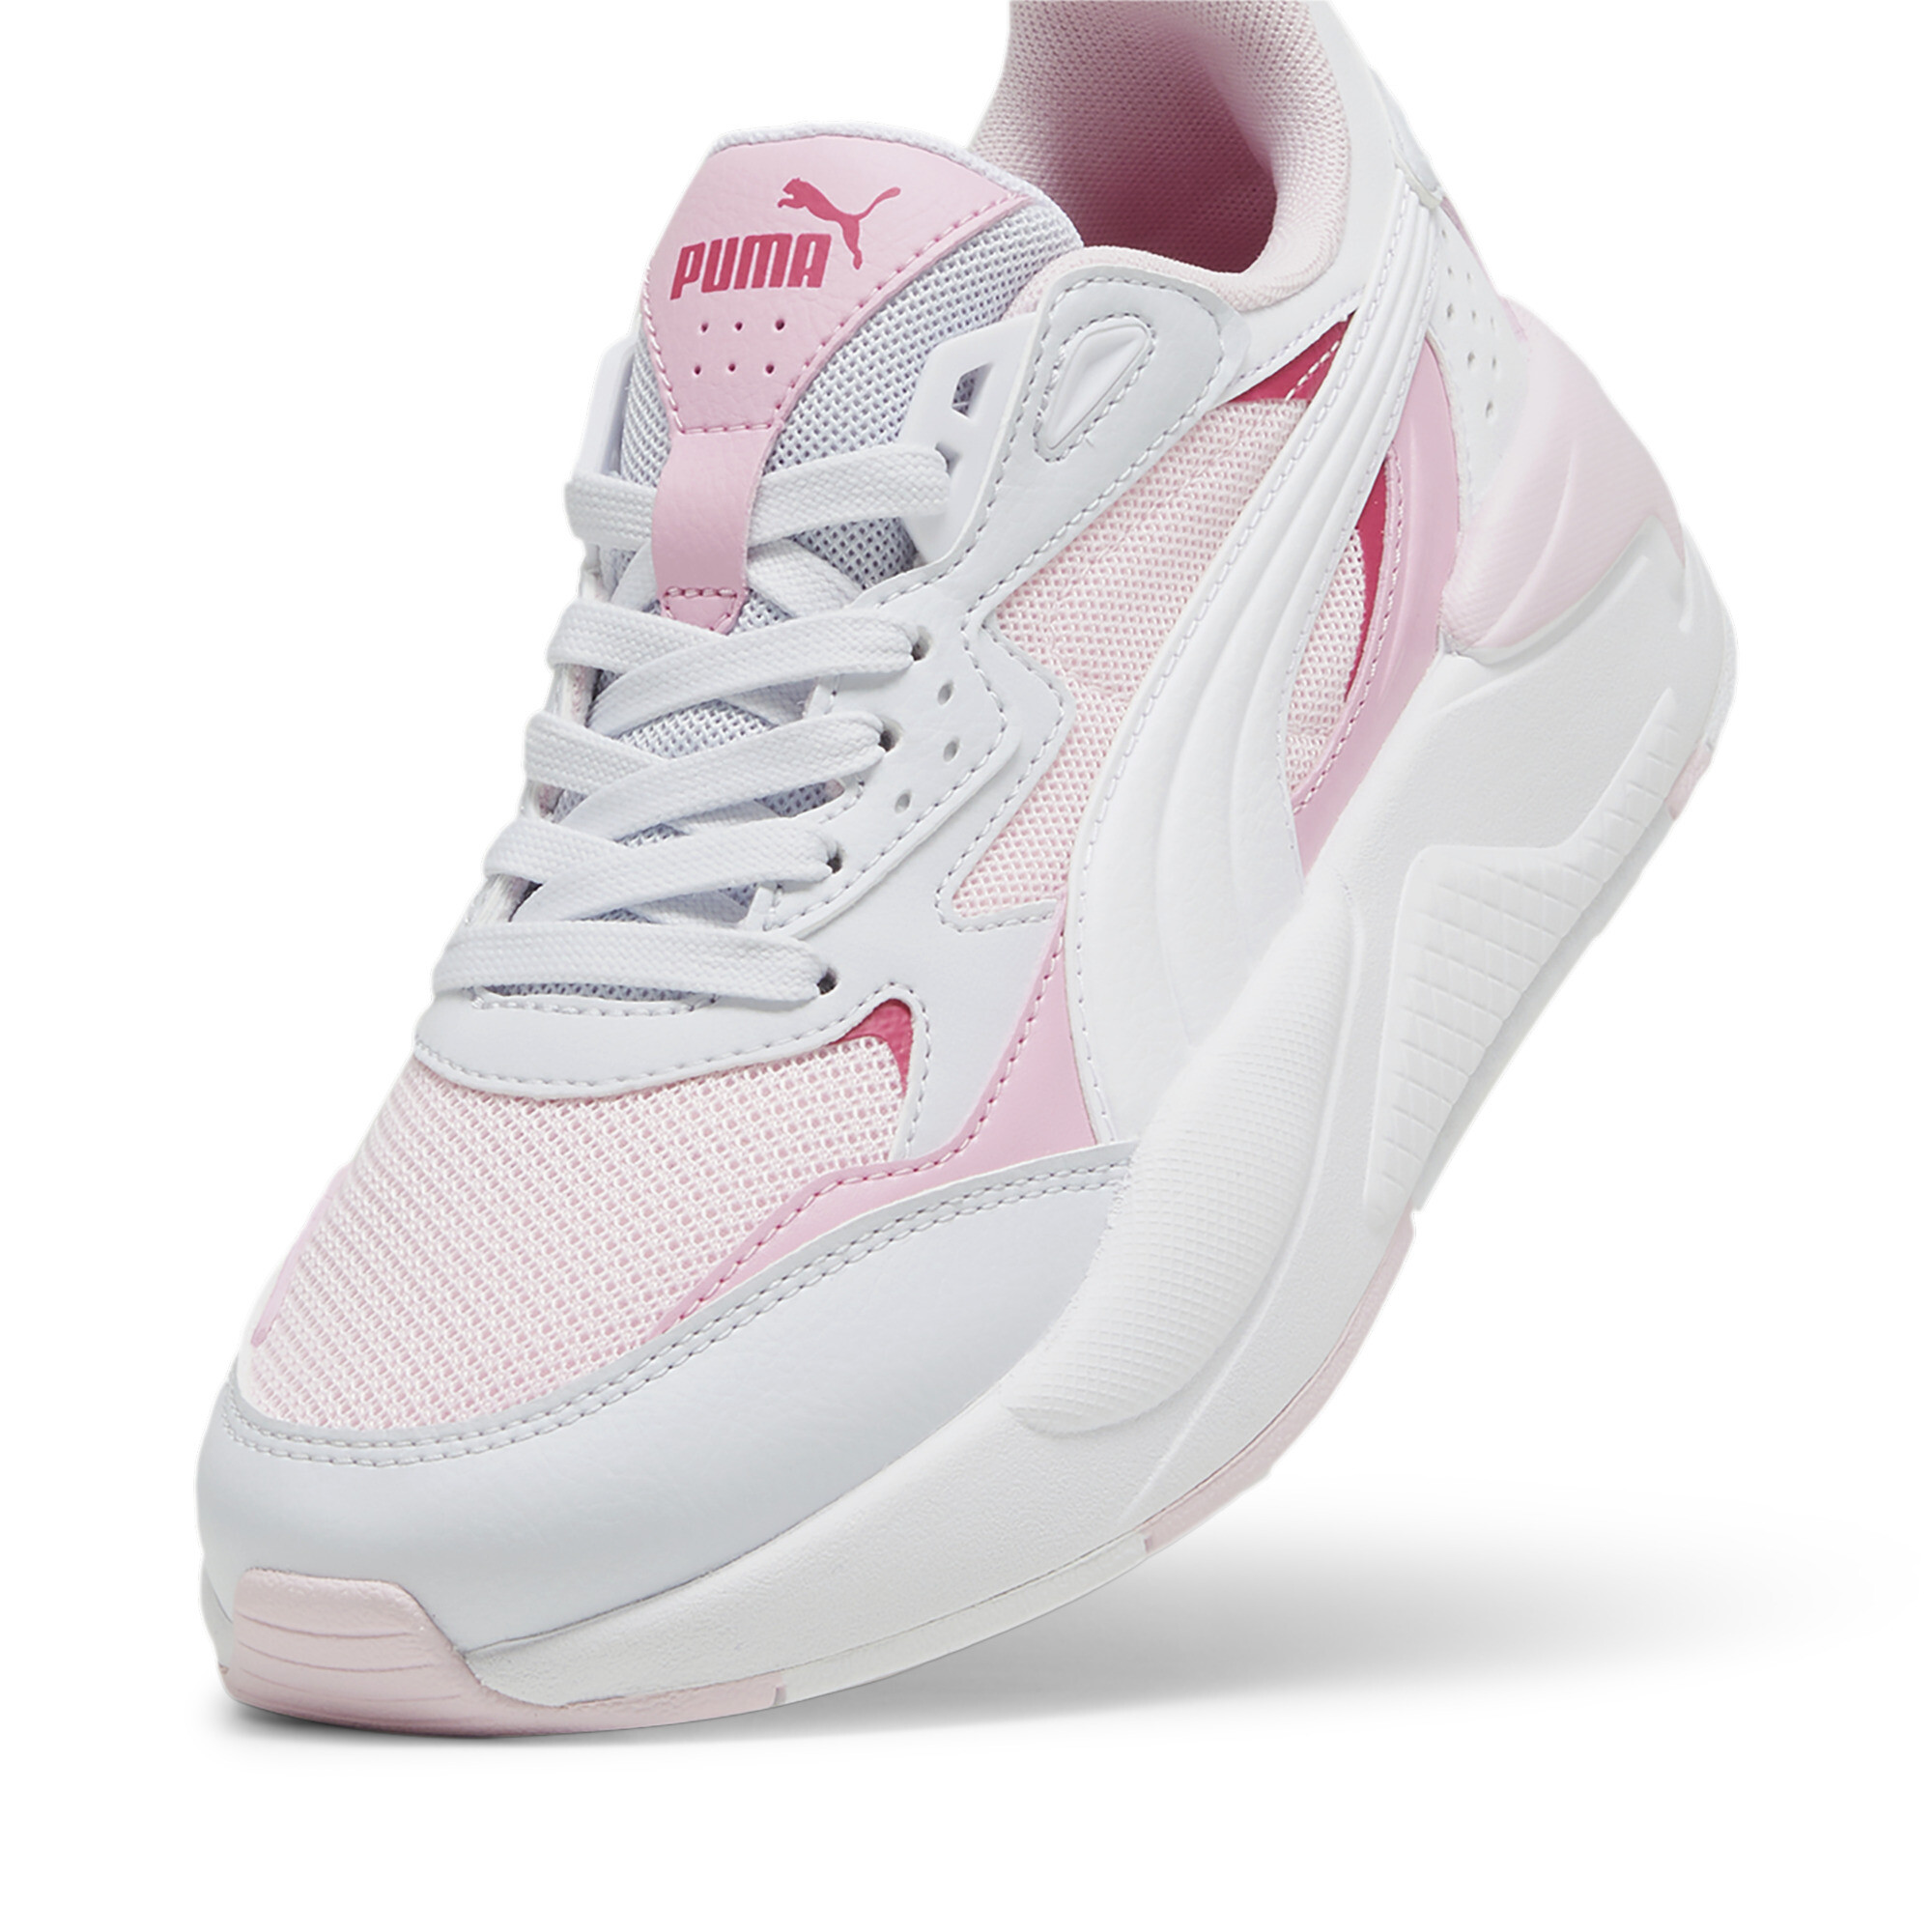 Puma X-Ray Speed Youth Trainers, Pink, Size 38, Shoes